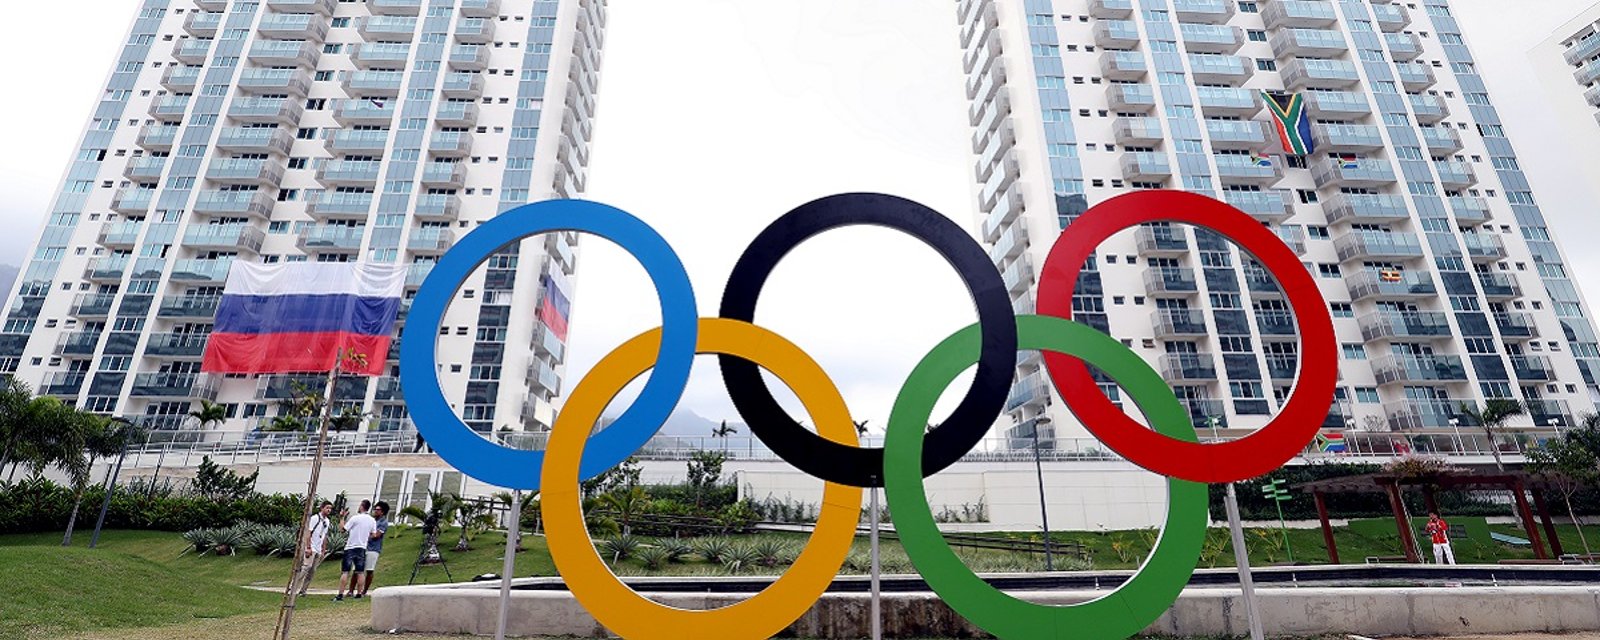 Rumor: NHL players secure an agreement over Olympic participation.